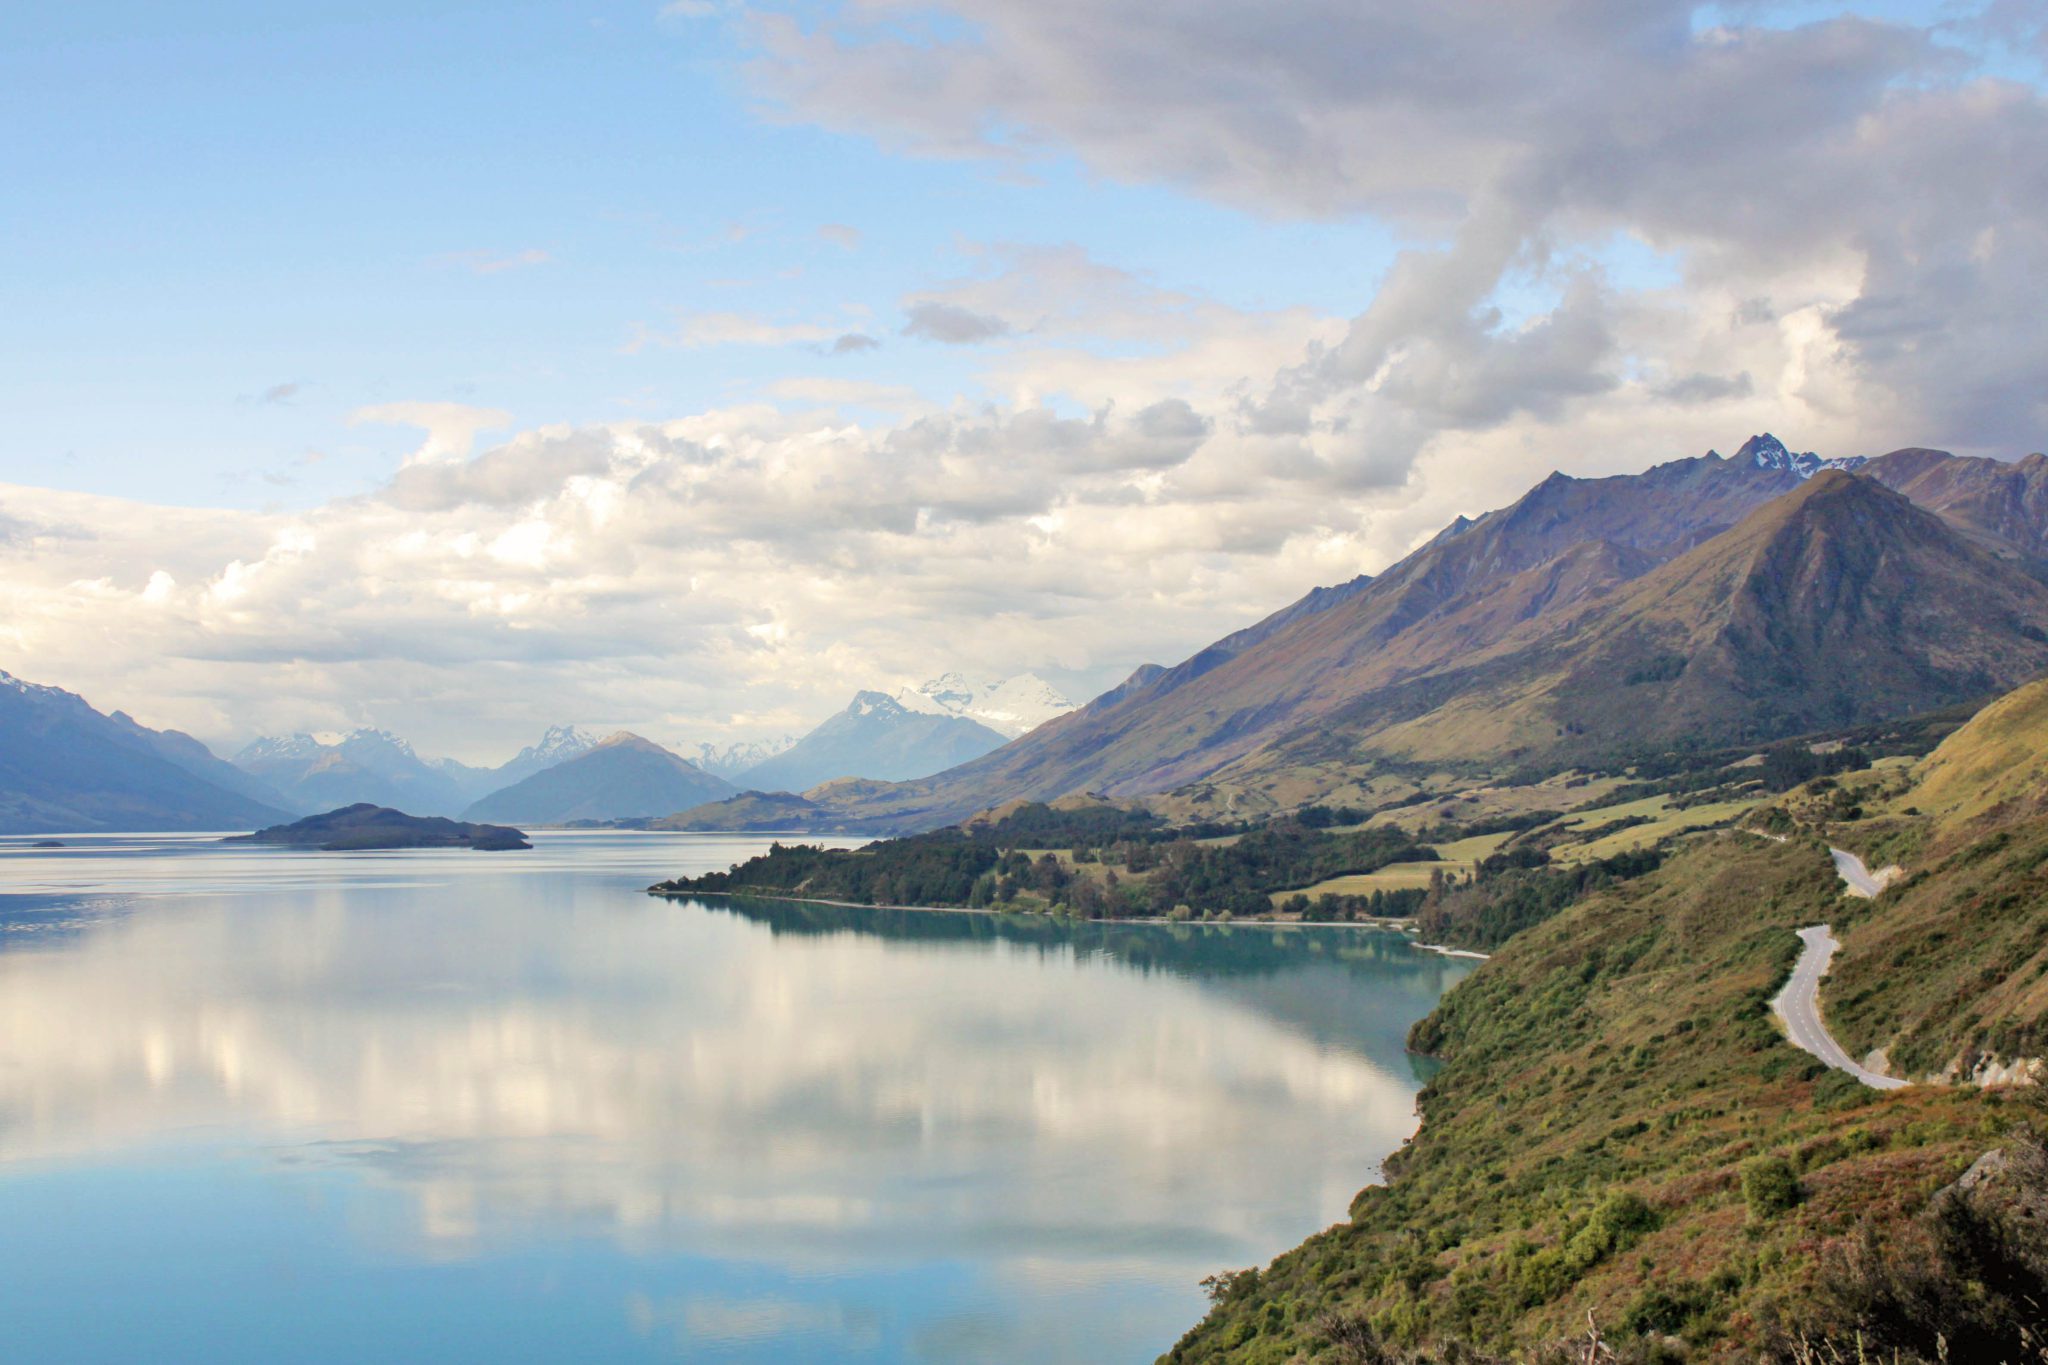 The drive to Glenorchy is one of the most beautiful drives in New Zealand 8 Unforgettable things to do in Queenstown New Zealand | Glenorchy #glenorchy #newzealand #queenstown #simplywander 